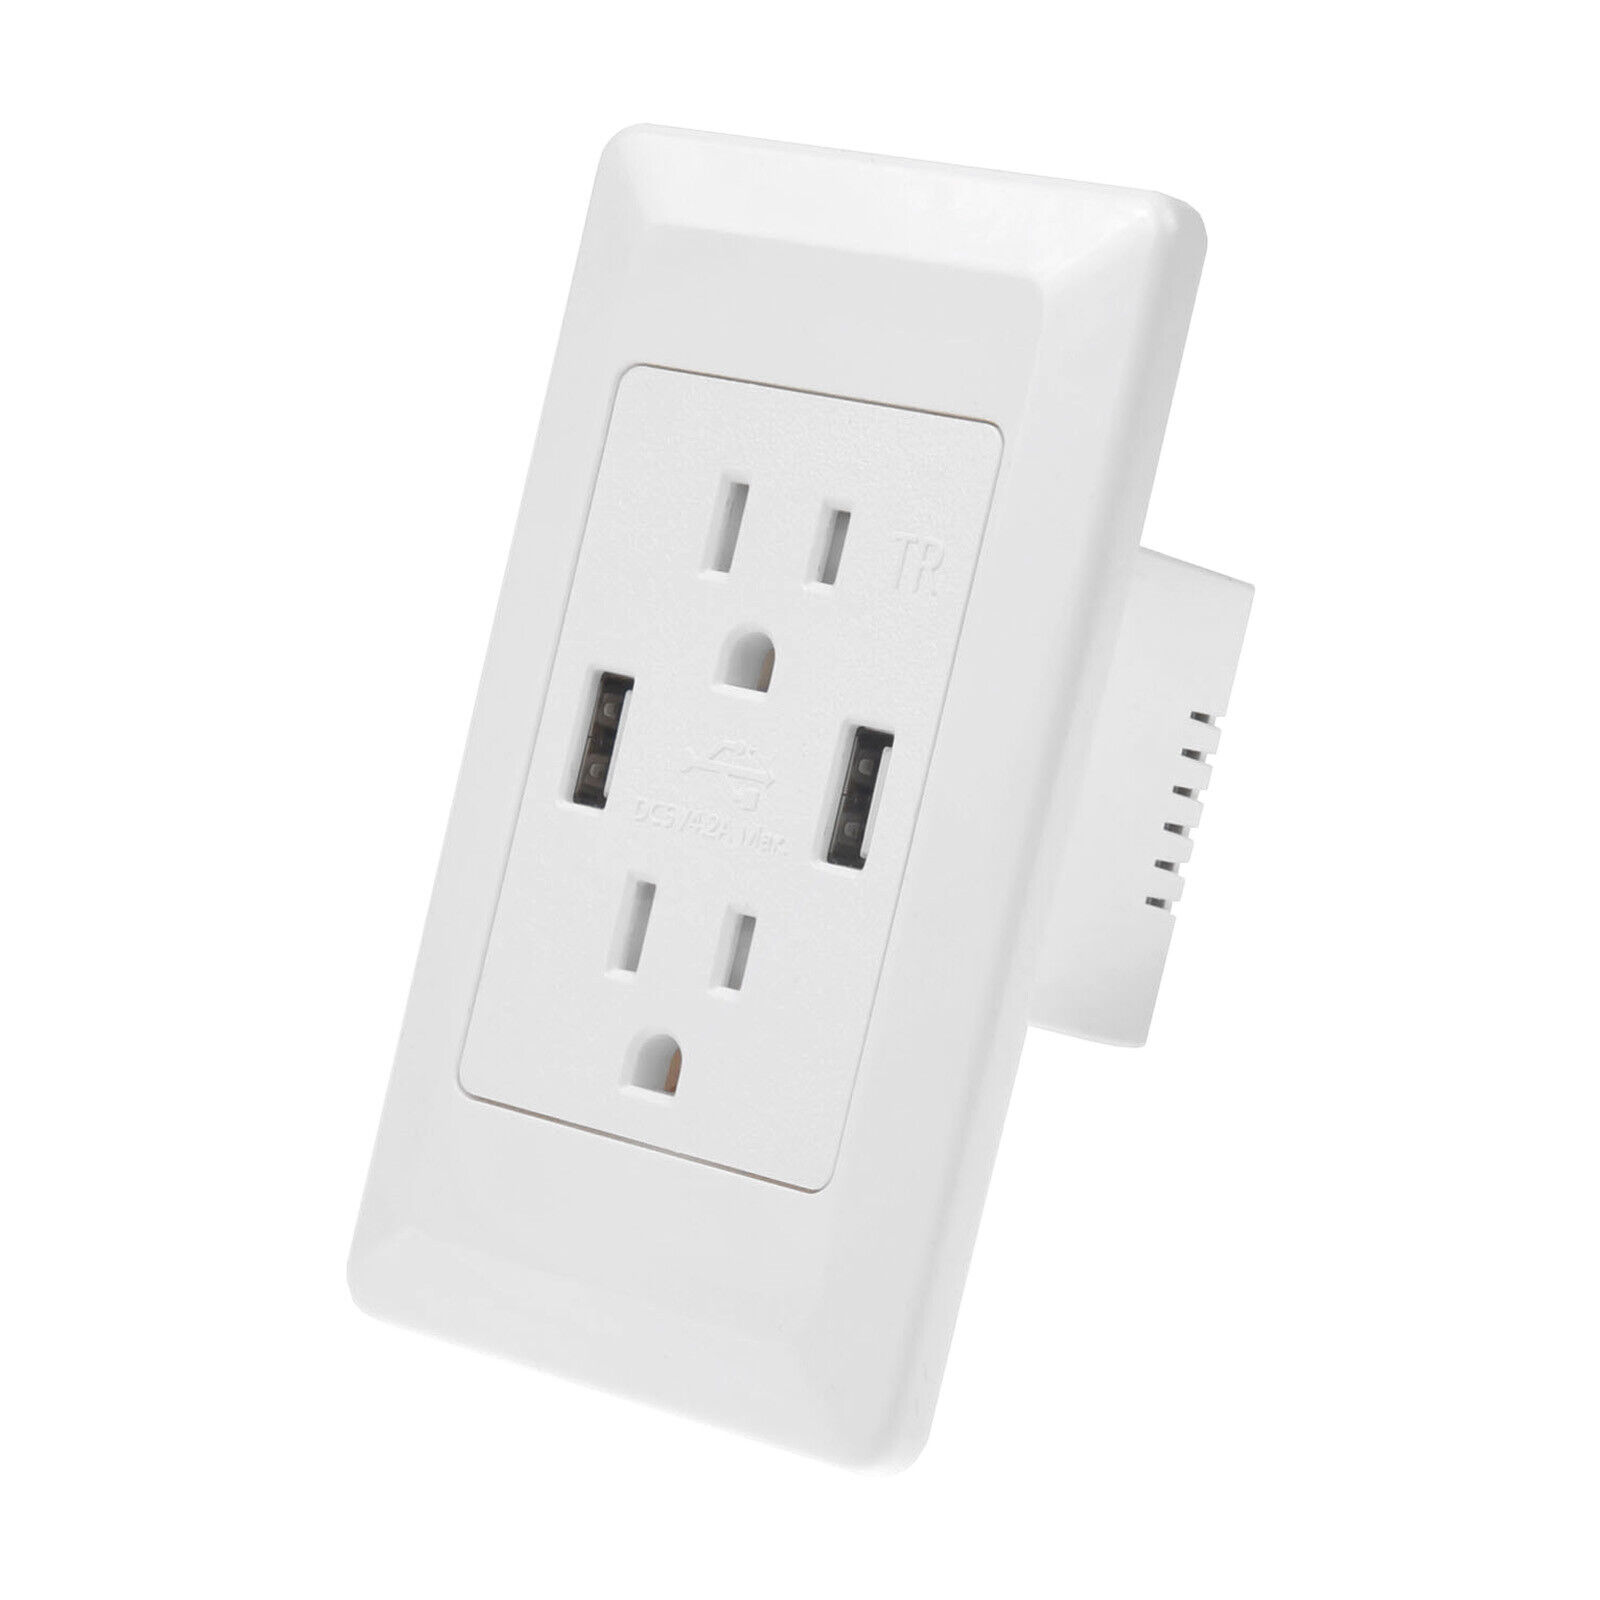 4.2A USB Port Wall Outlet Charger w/ 15A Tamper Resistant Receptacle